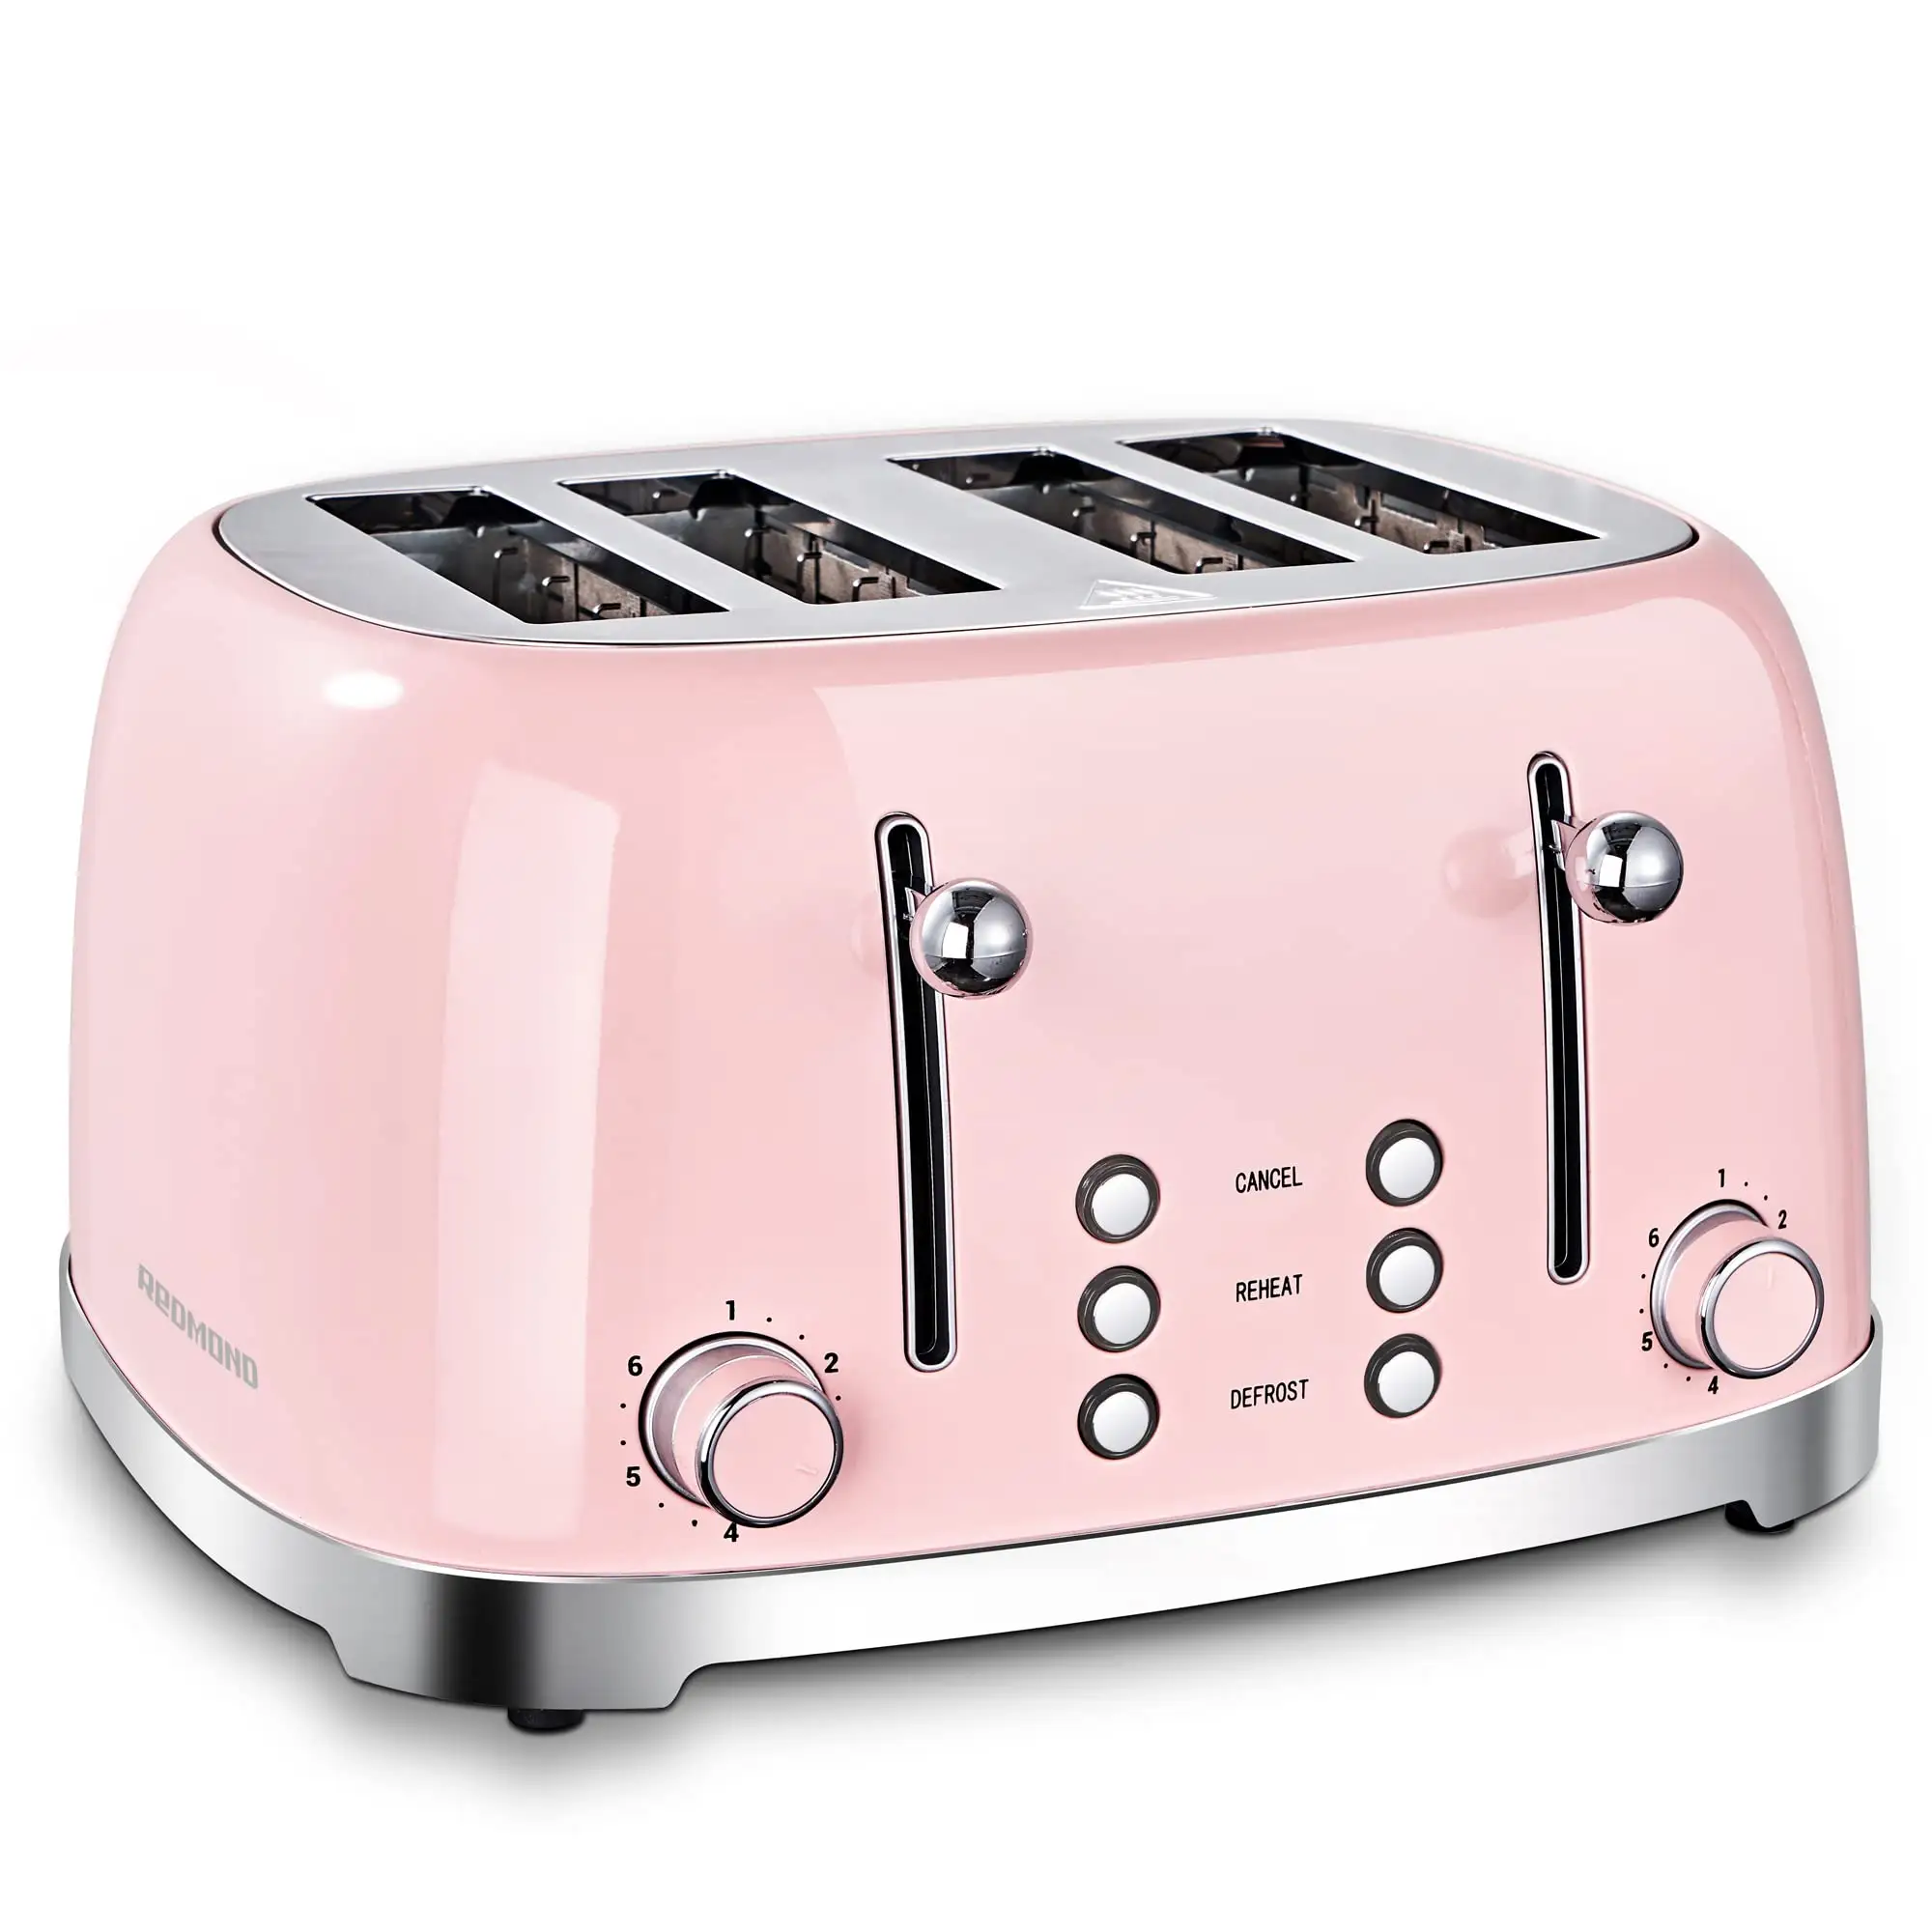 Ascoli with Bagel Defrost Cancel Function, 6 Browning Settings, Pink 4 Slice Retro Stainless Steel Toasters